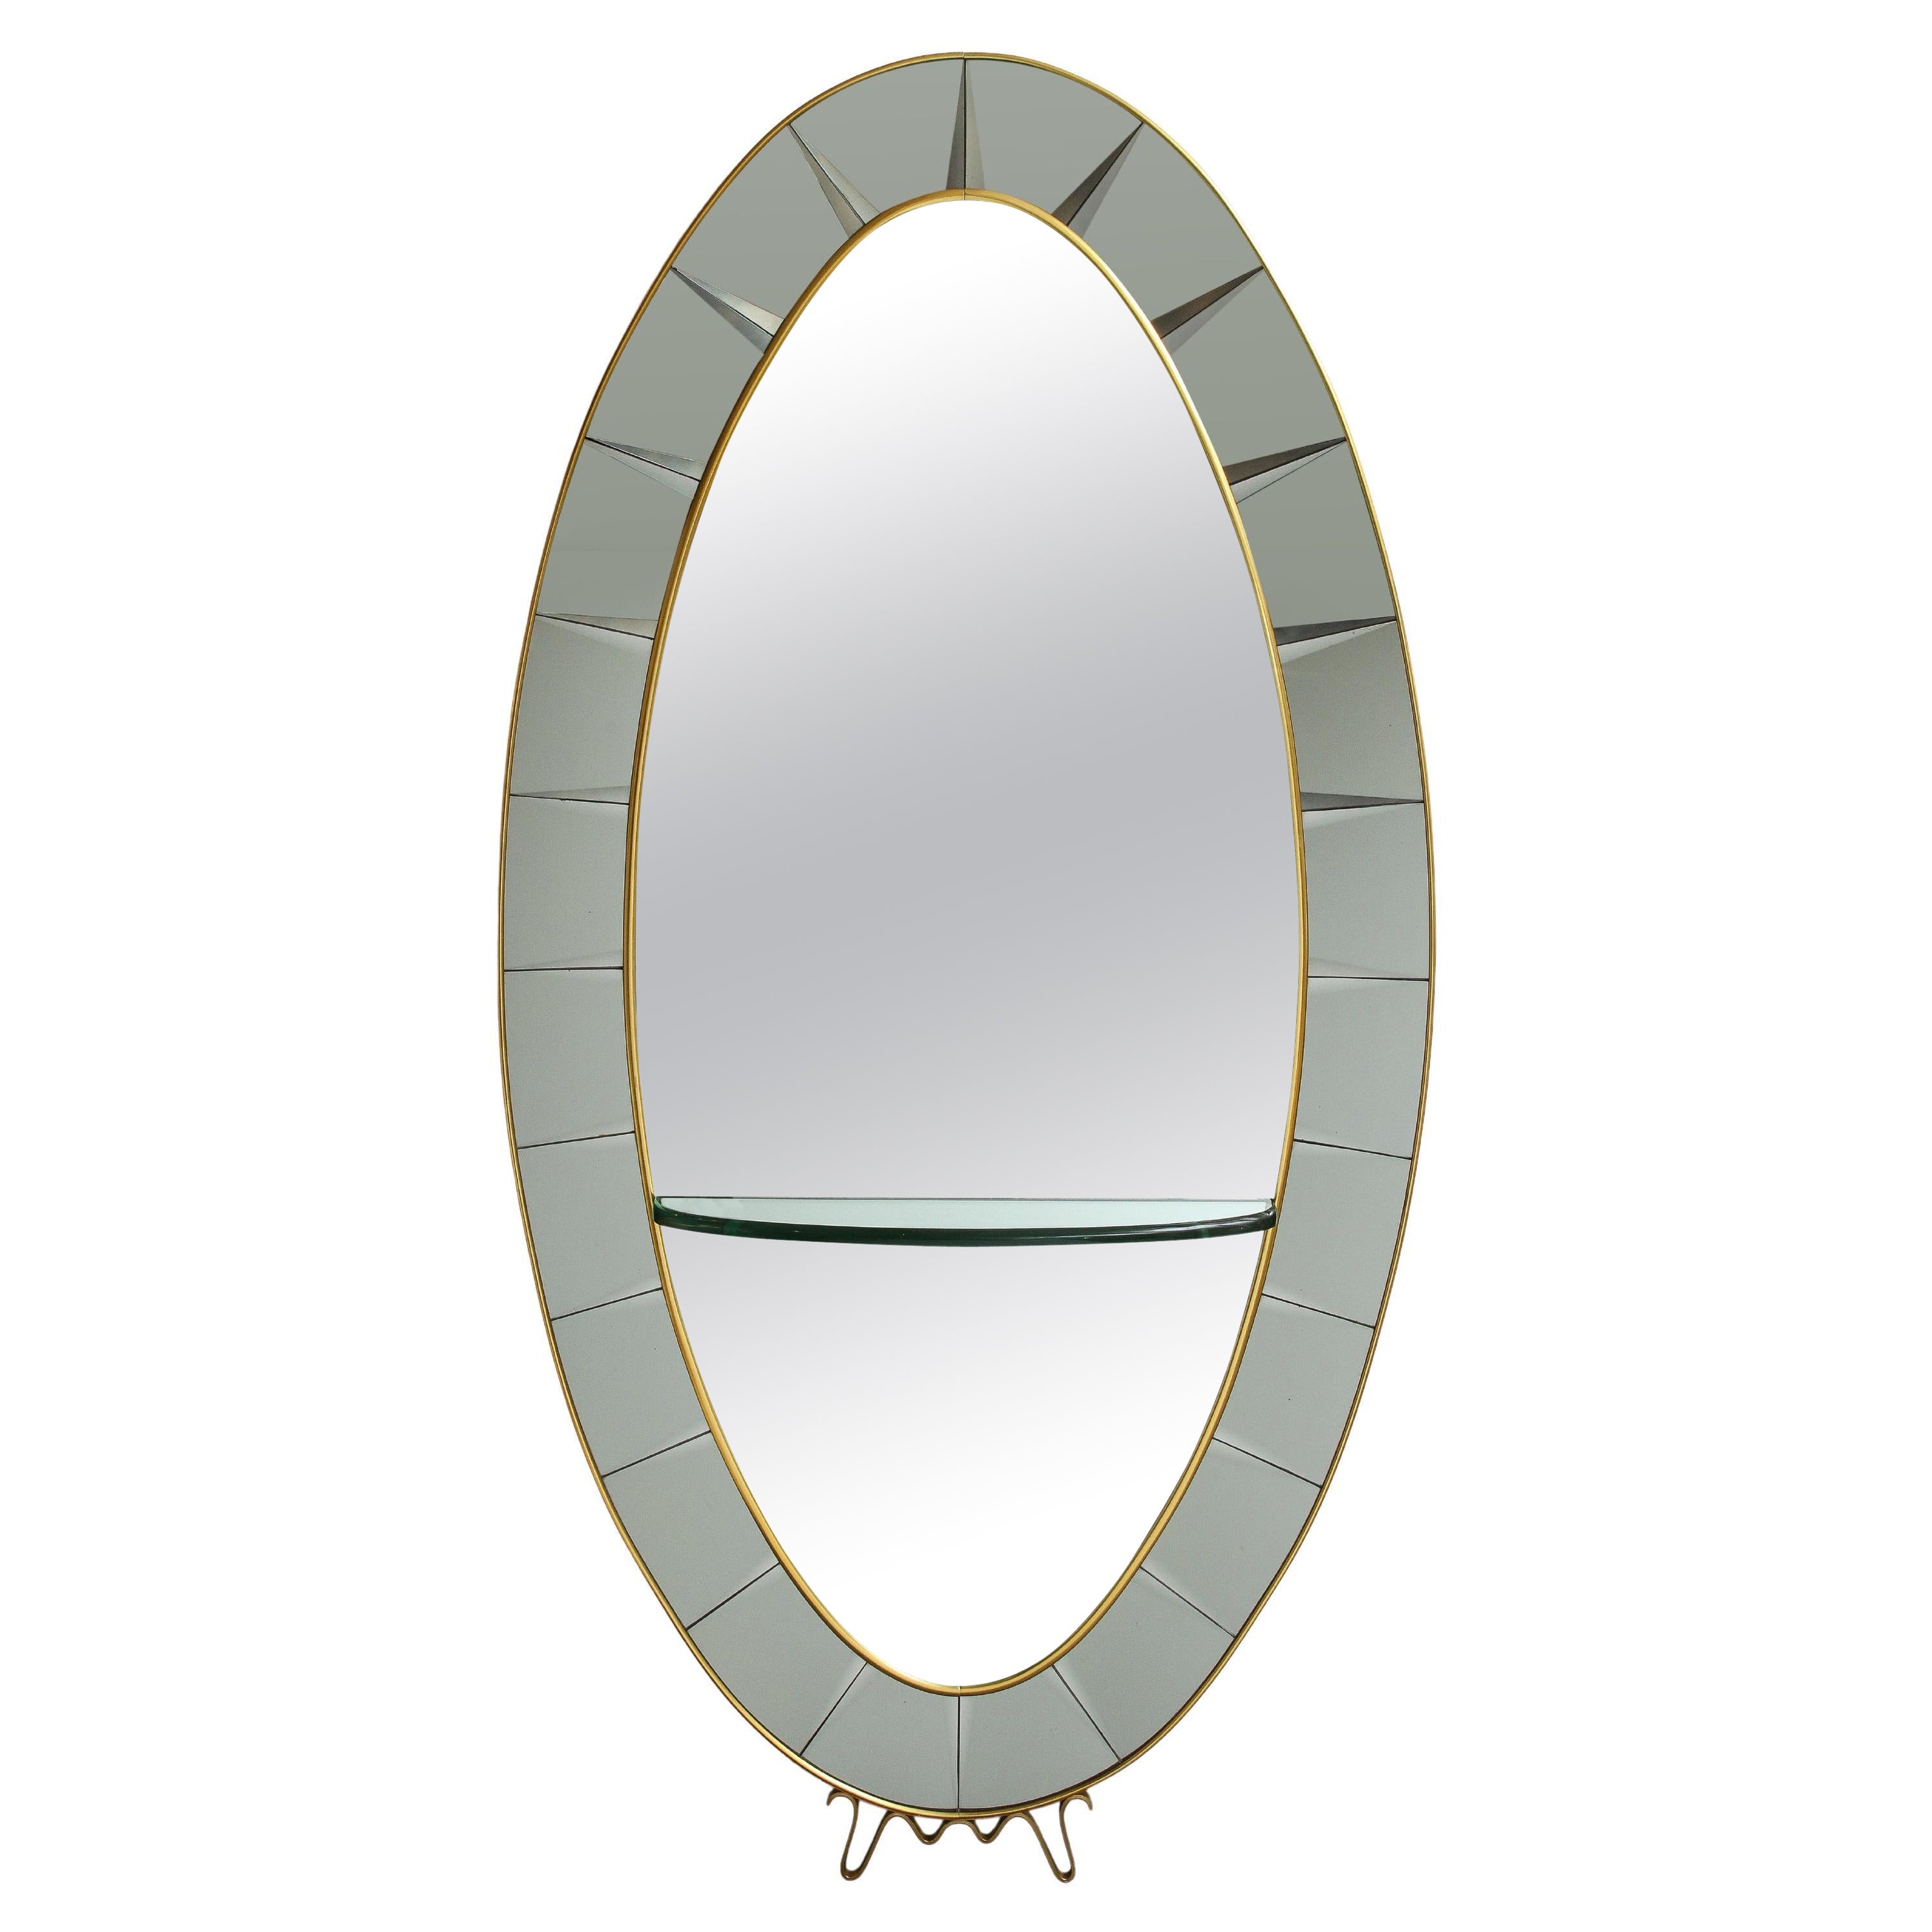 What is a floor-length mirror called?